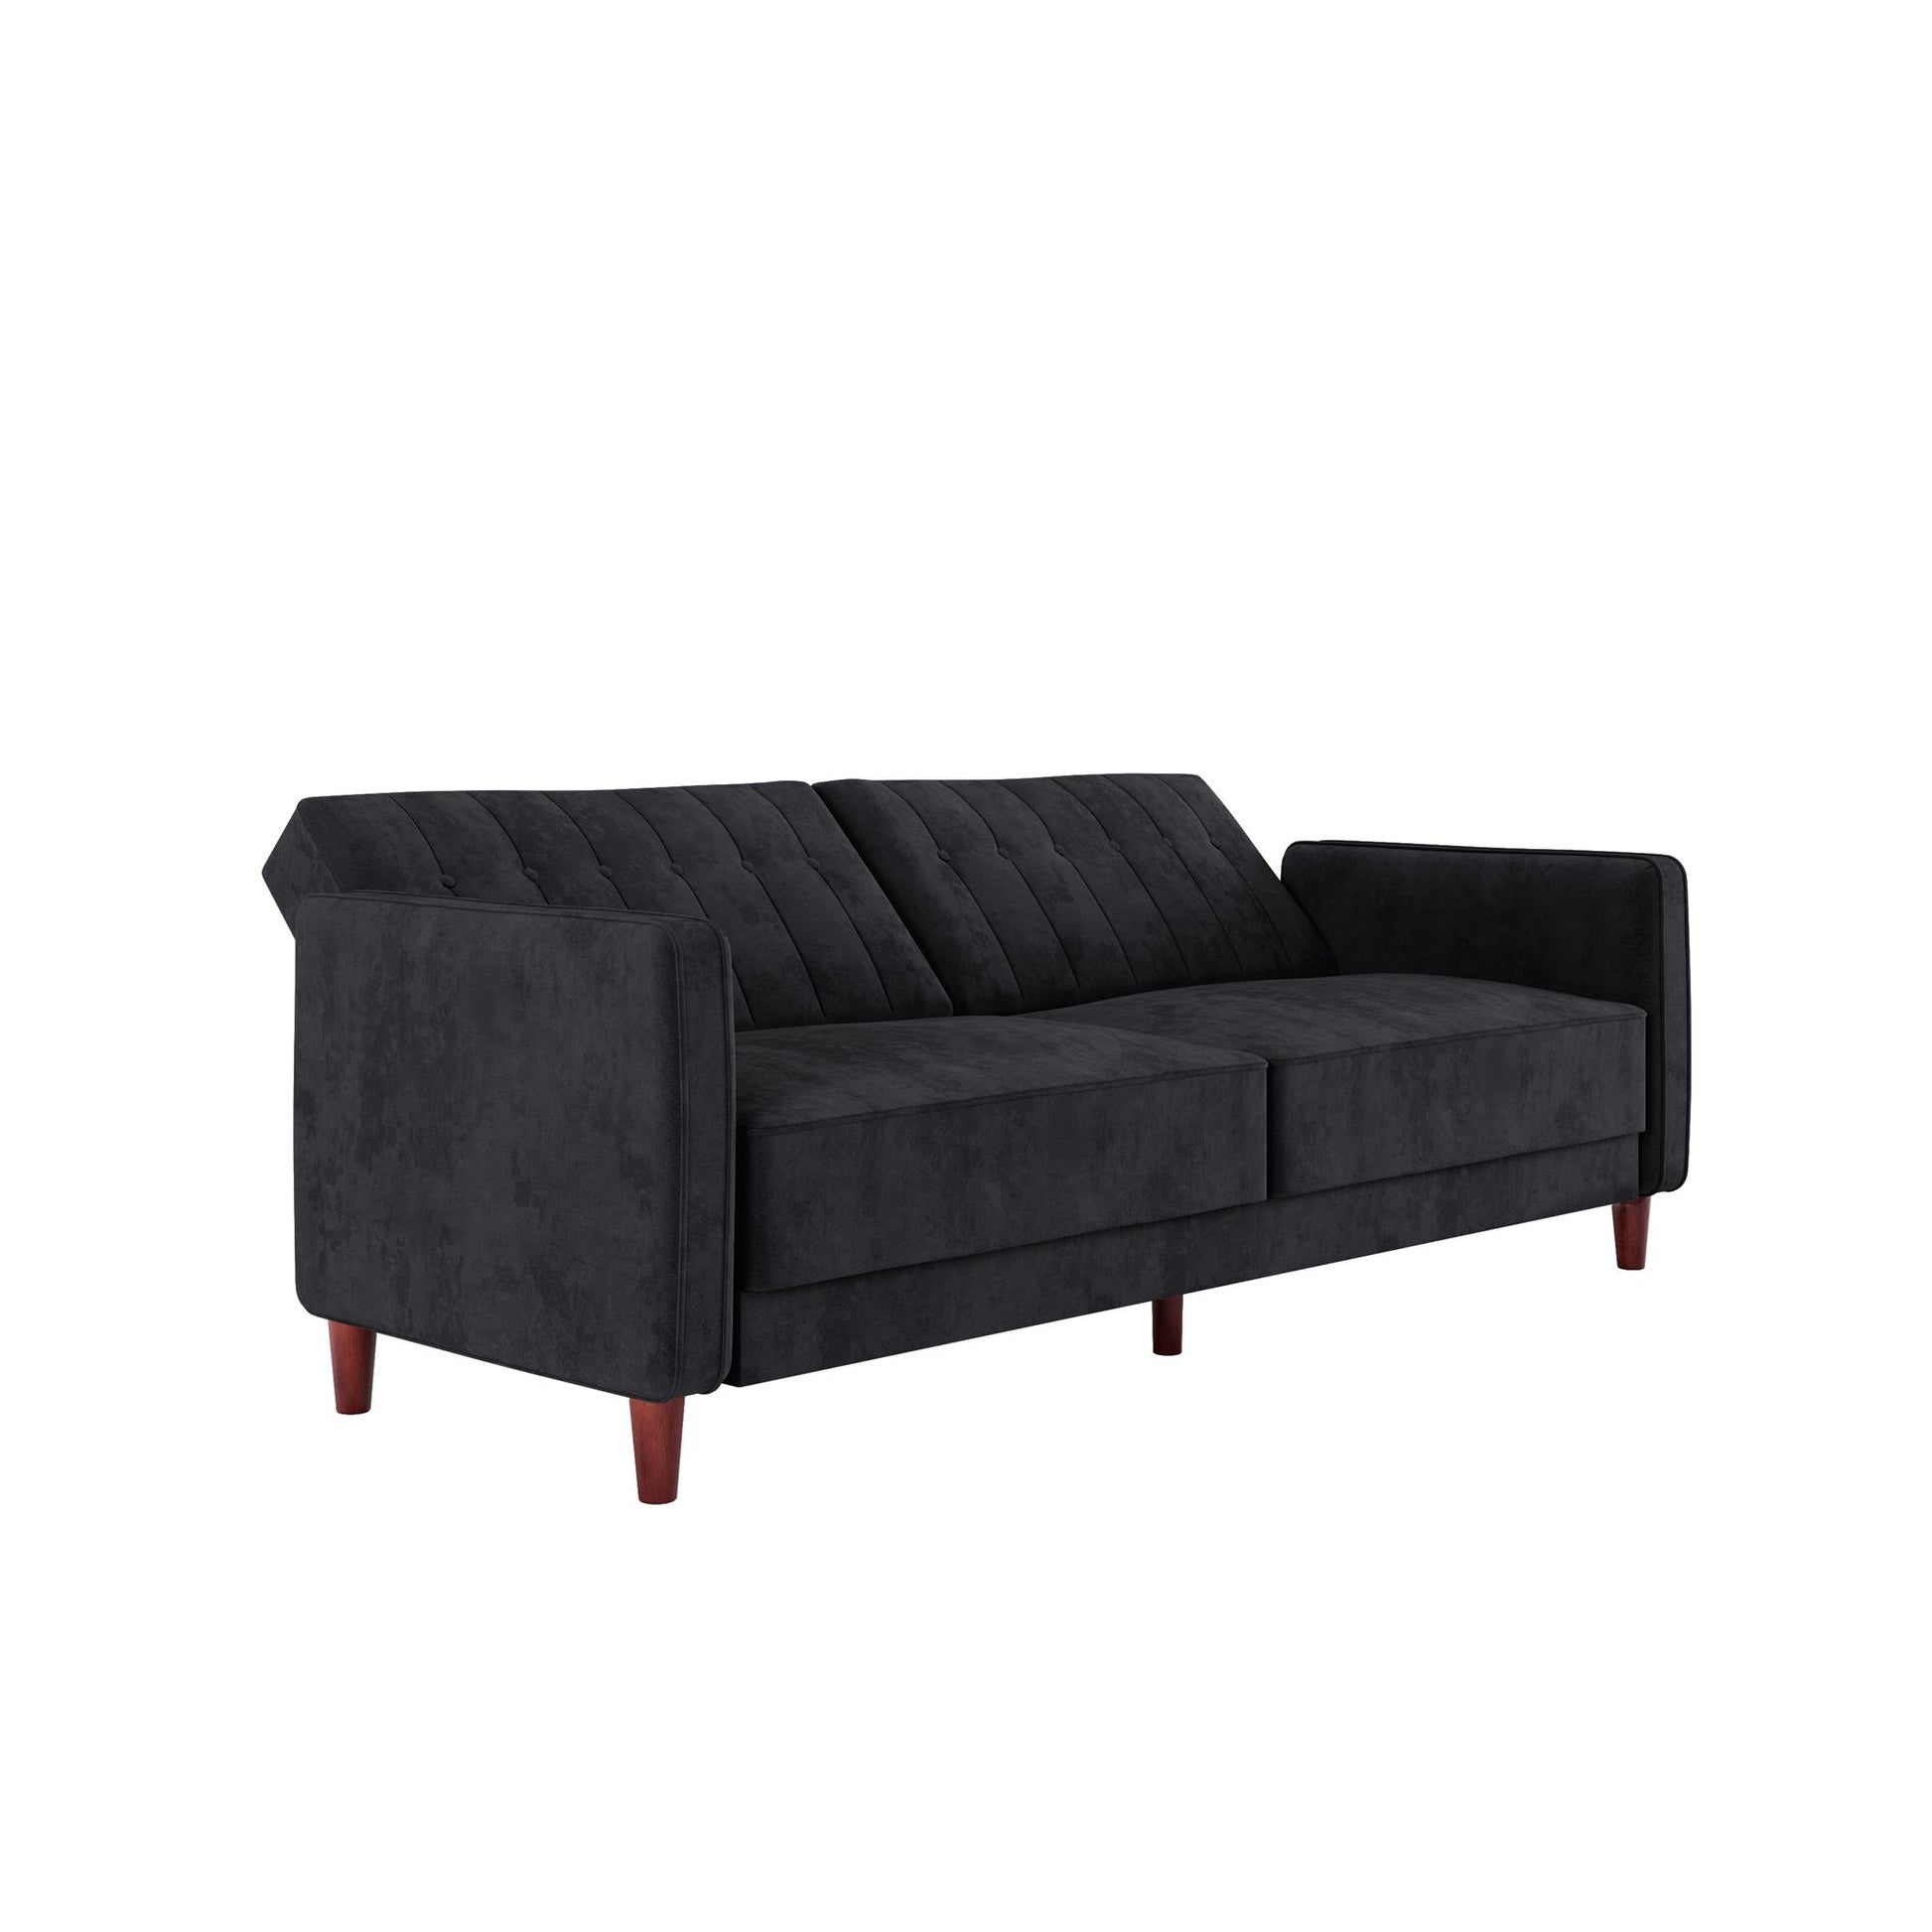 Pin Tufted Transitional Futon with Vertical Stitching and Button Tufting - Black